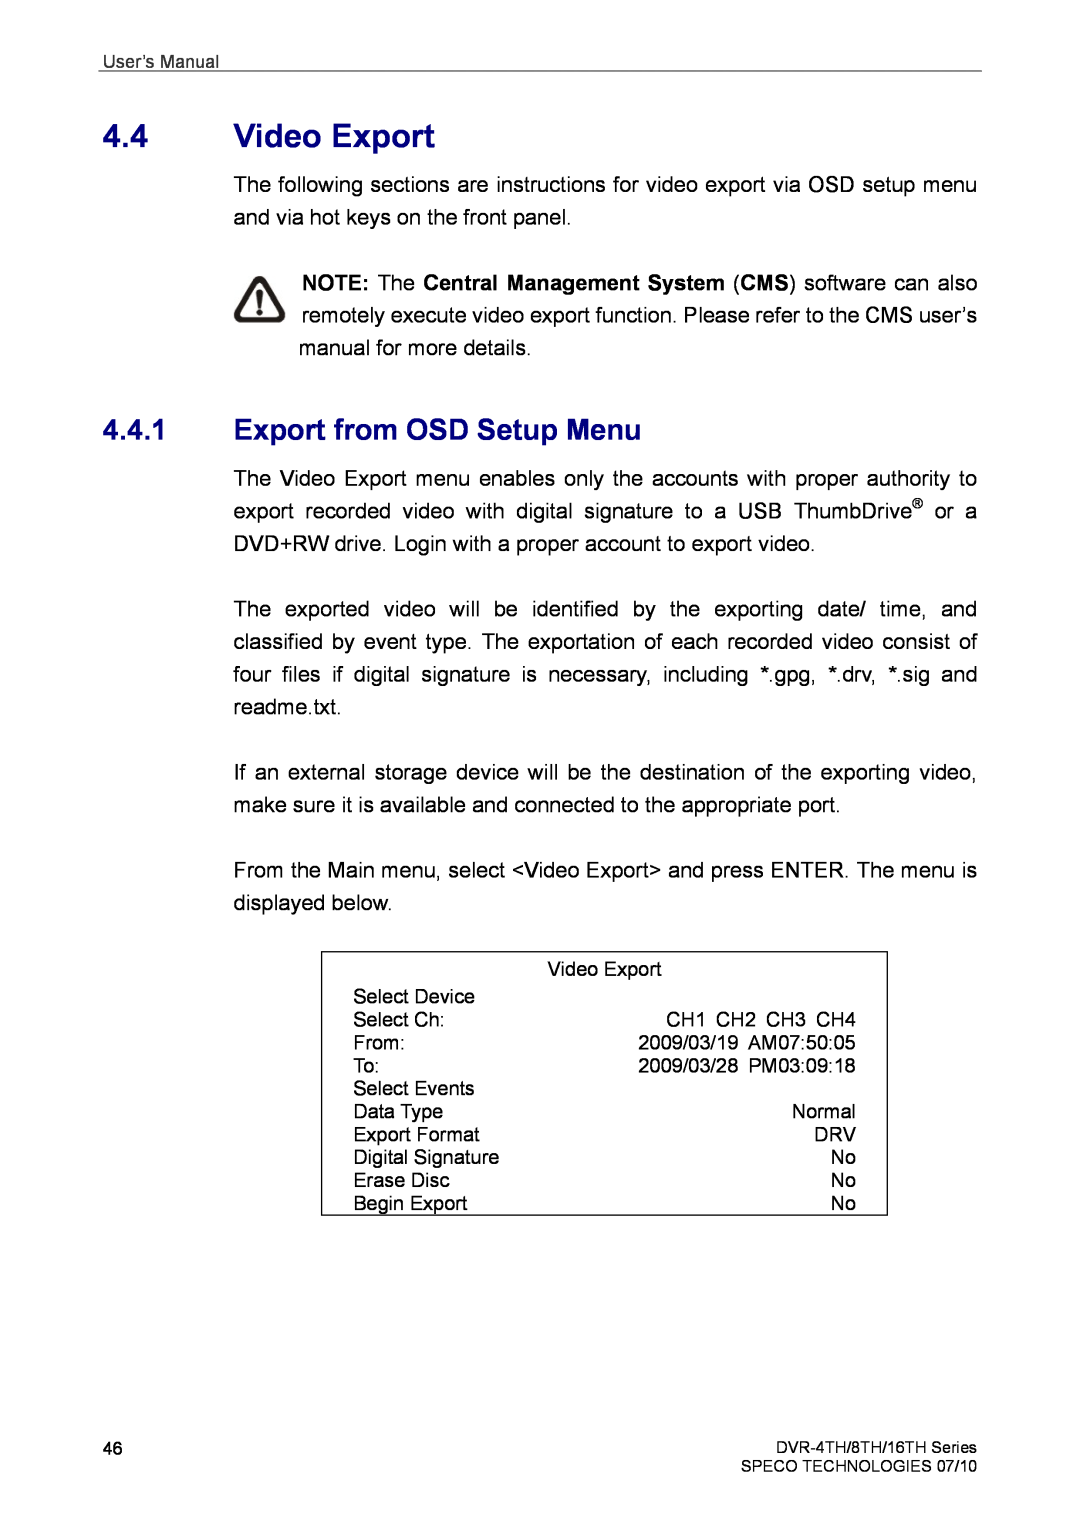 Speco Technologies 16TH, 8TH, 4TH user manual Video Export, Export from OSD Setup Menu 